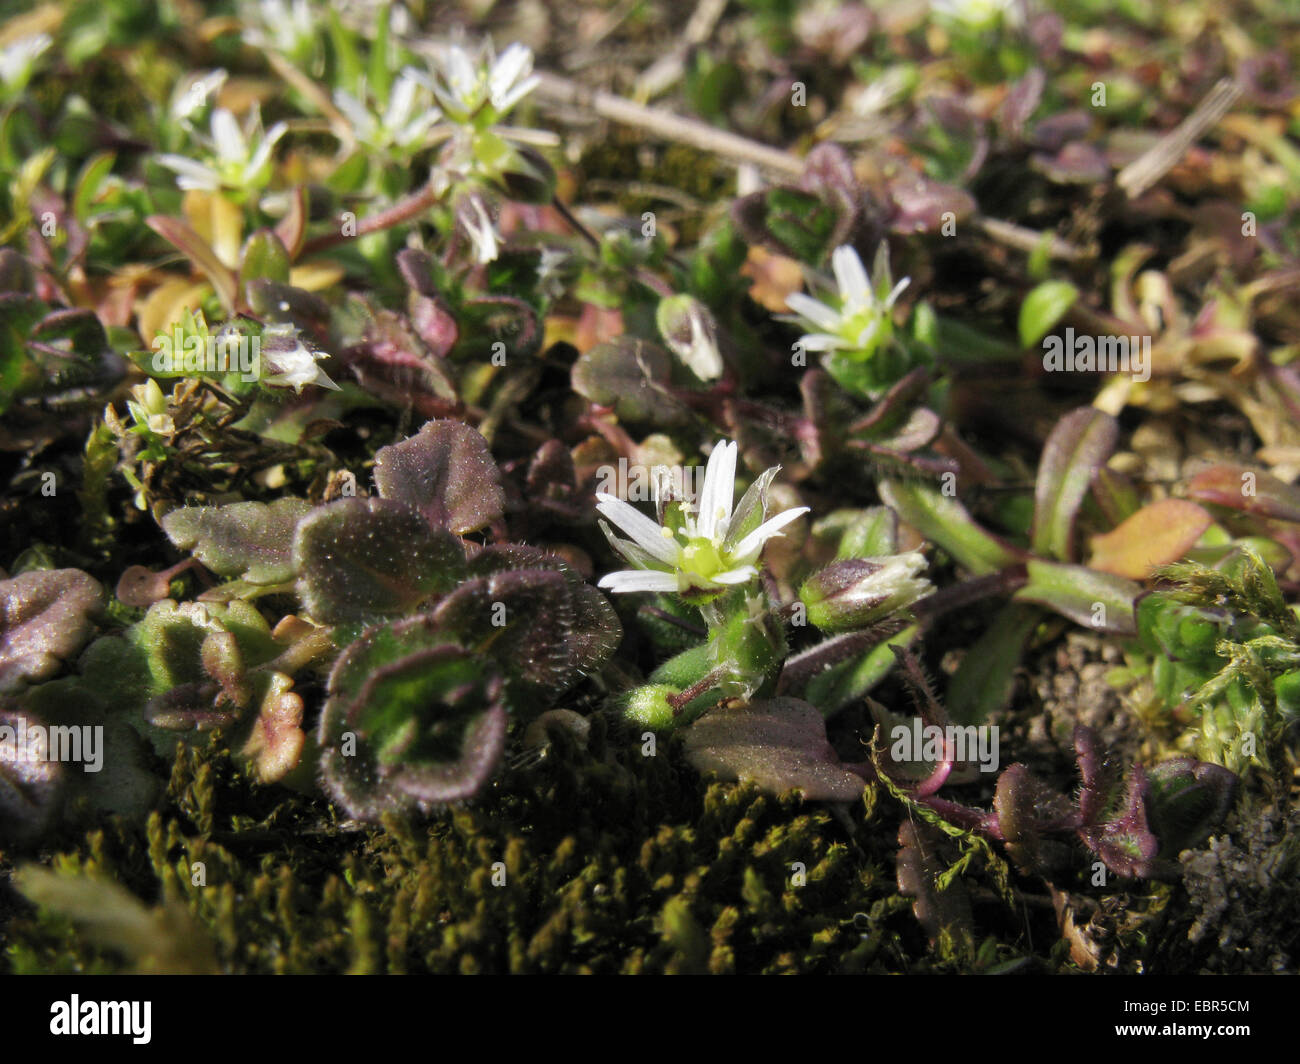 Little mouse-ear, Five-stamen mouse-ear chickweed (Cerastium semidecandrum), blooming on industrial derelict land with moss an Veronica, Germany, Lower Saxony Stock Photo